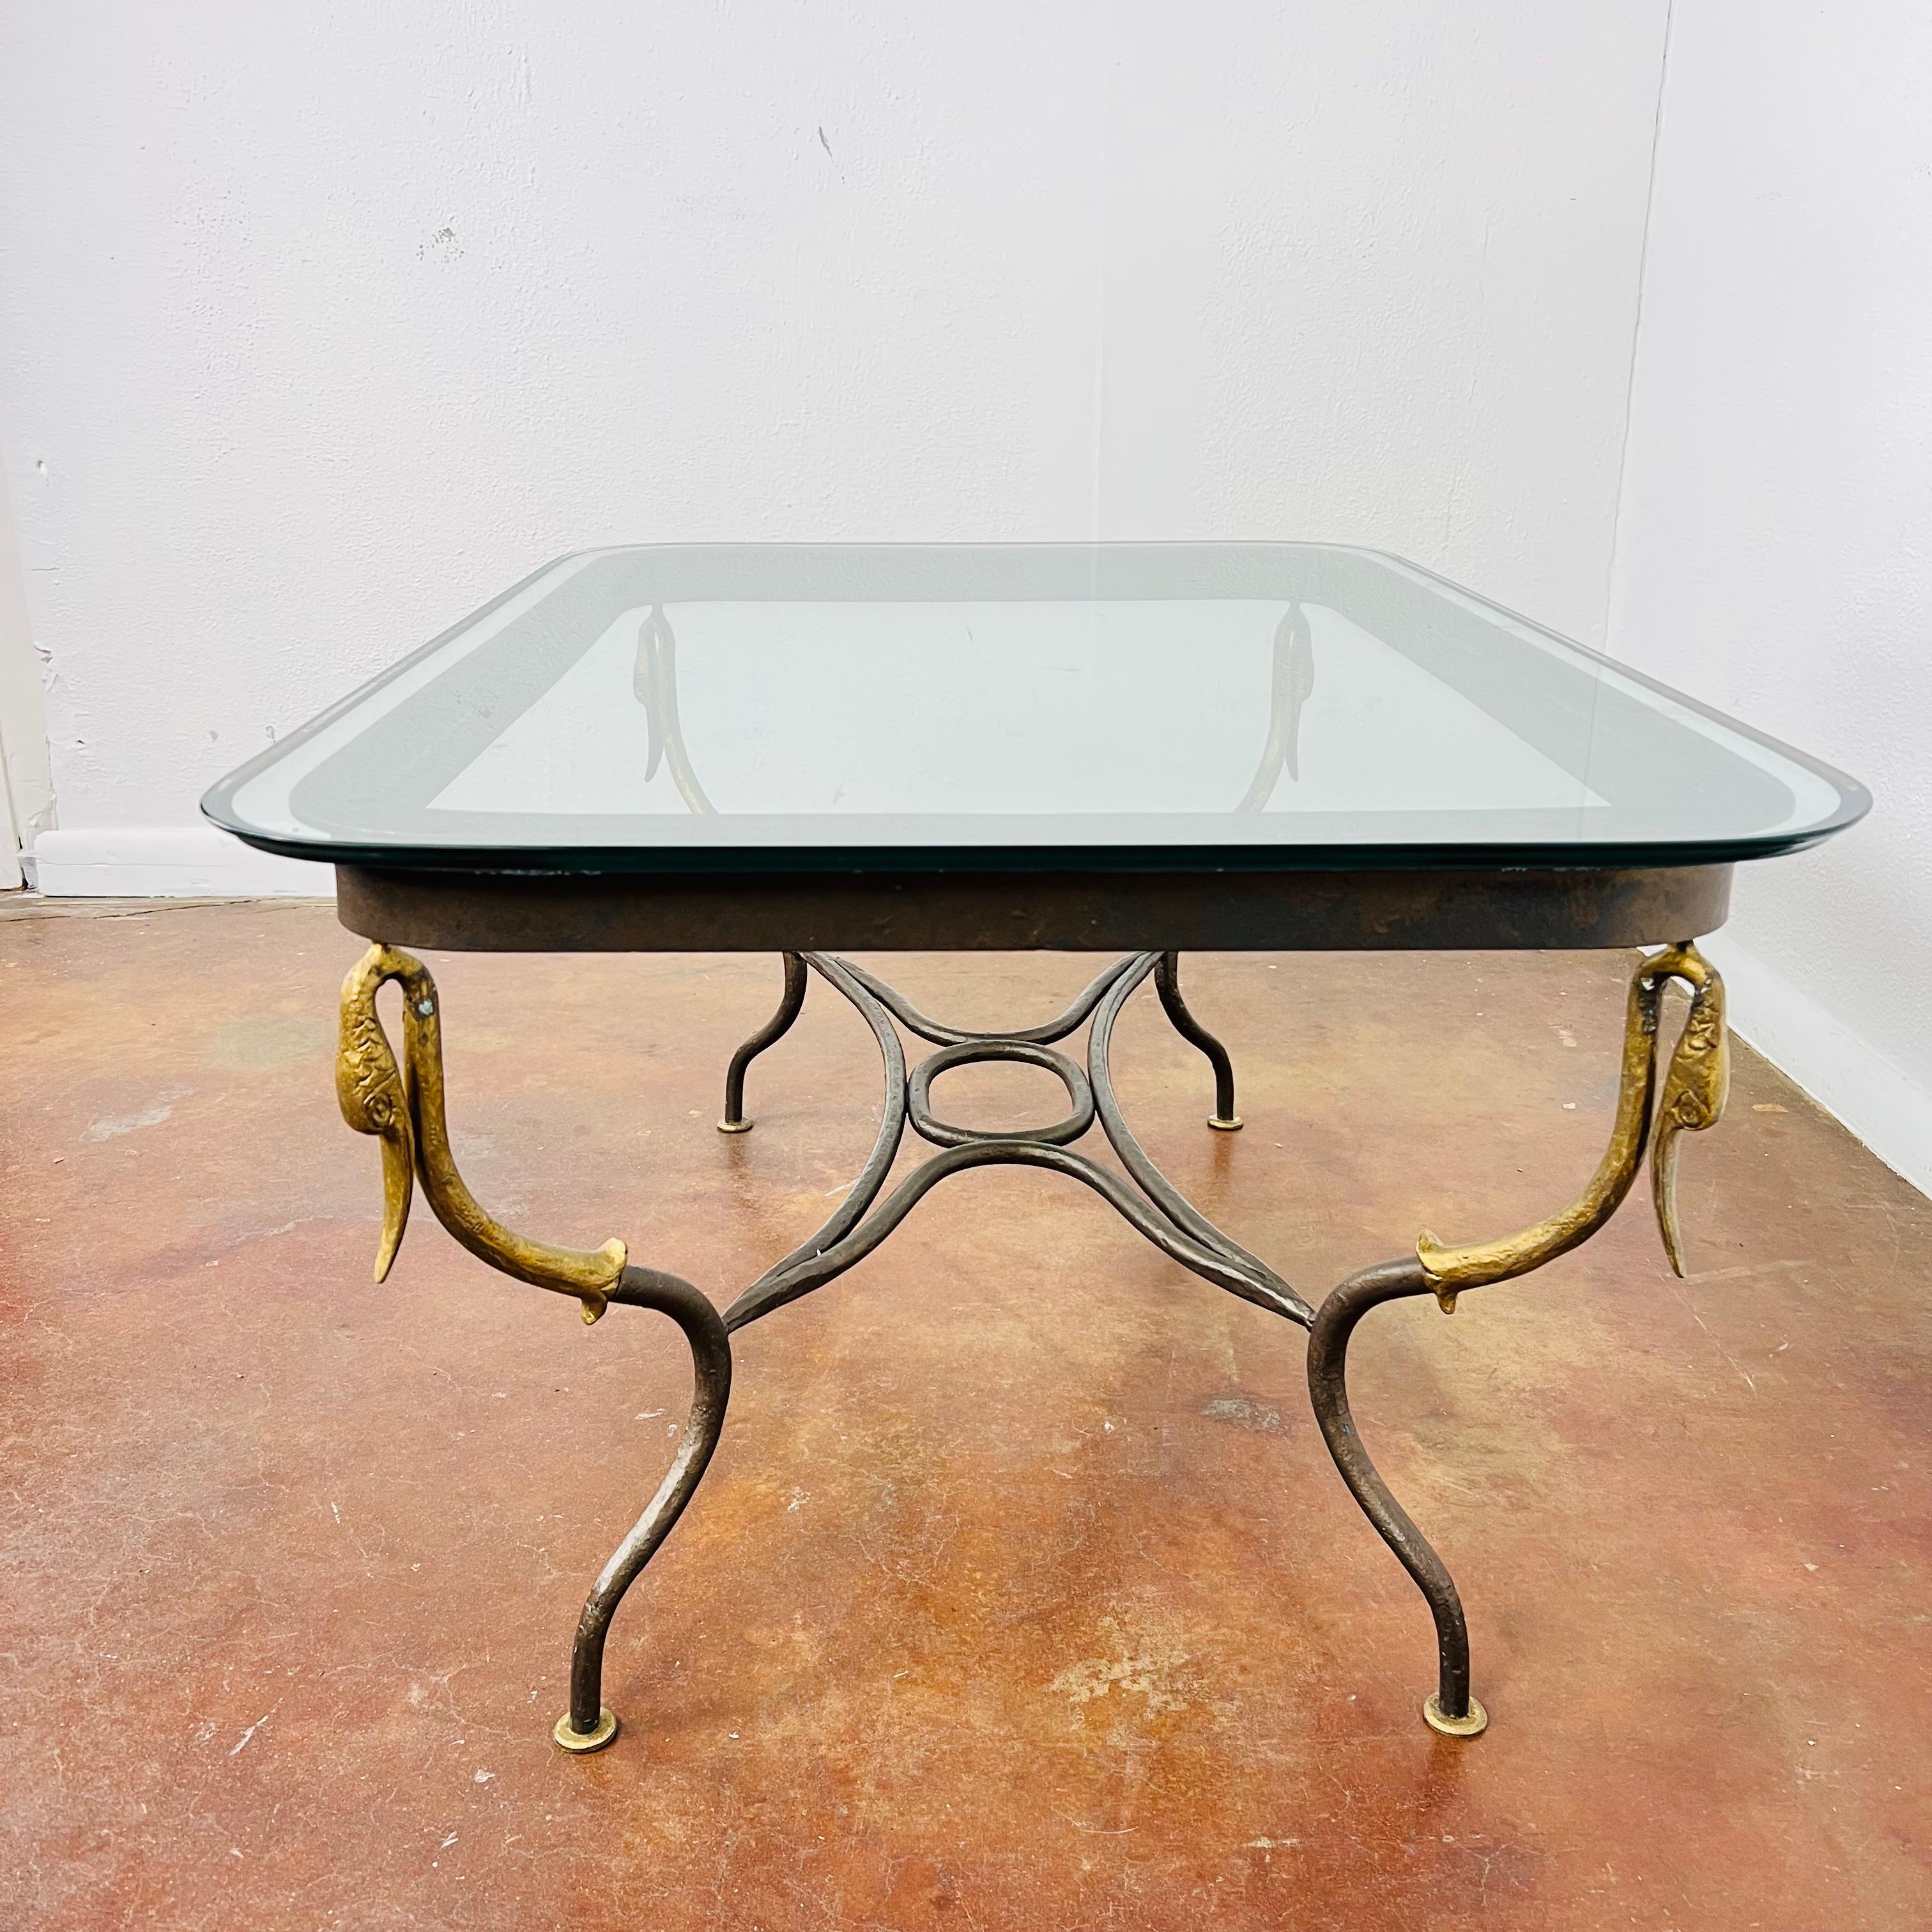 Gilded Wrought Iron Empire Coffee Table In Good Condition For Sale In Dallas, TX